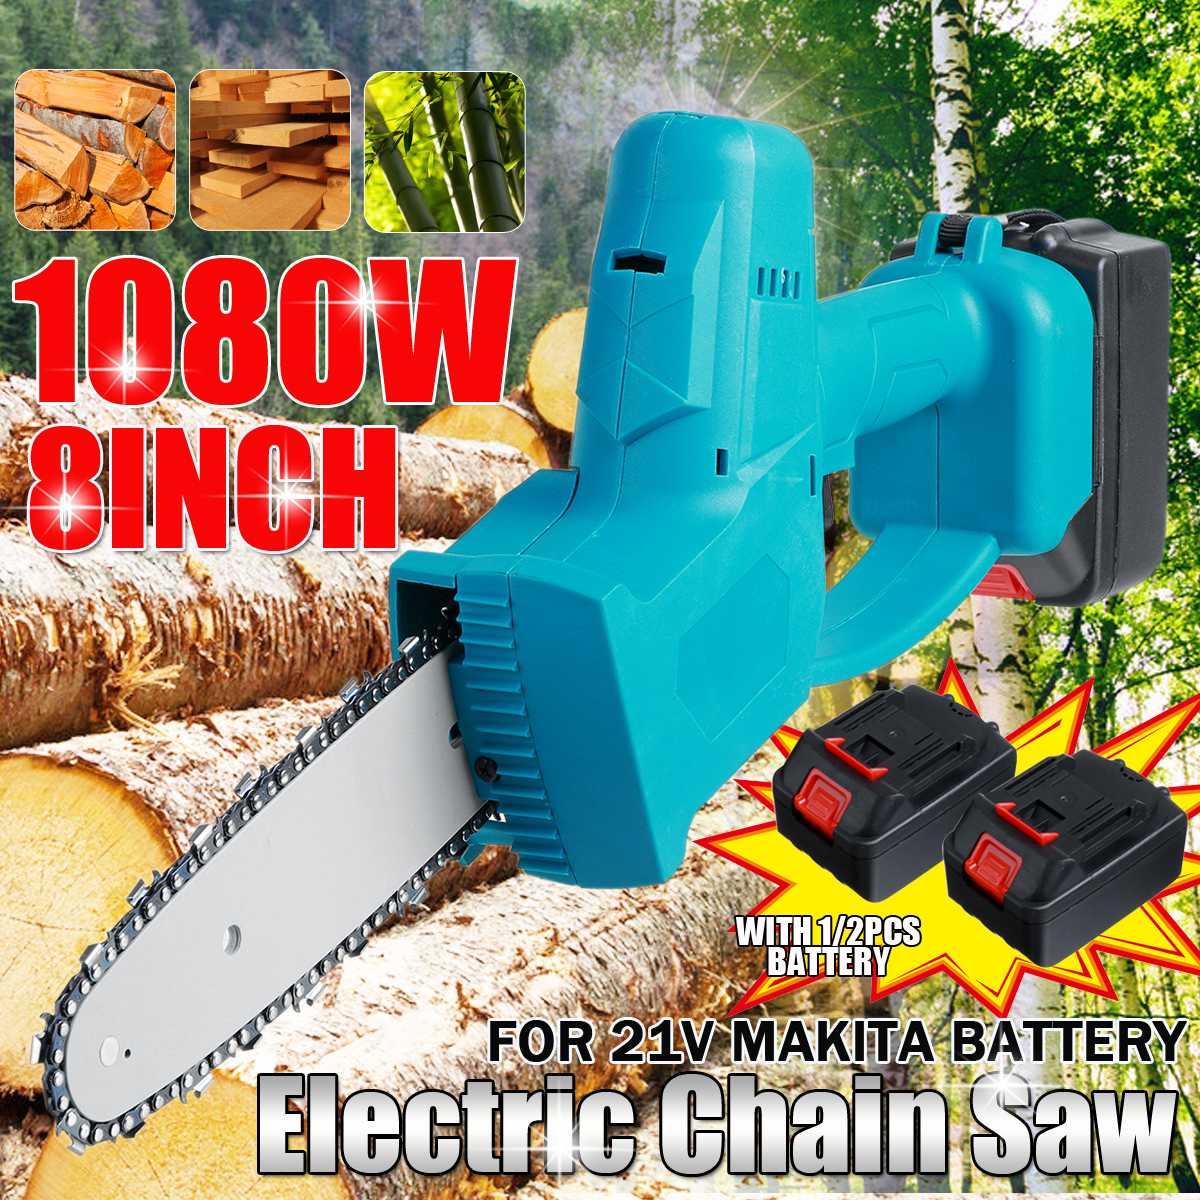 21V-8Inch-1080W-One-Hand-Saw-Woodworking-Electric-Cordless-ChainSaw-Wood-Cutter-Power-Tool-1806127-1